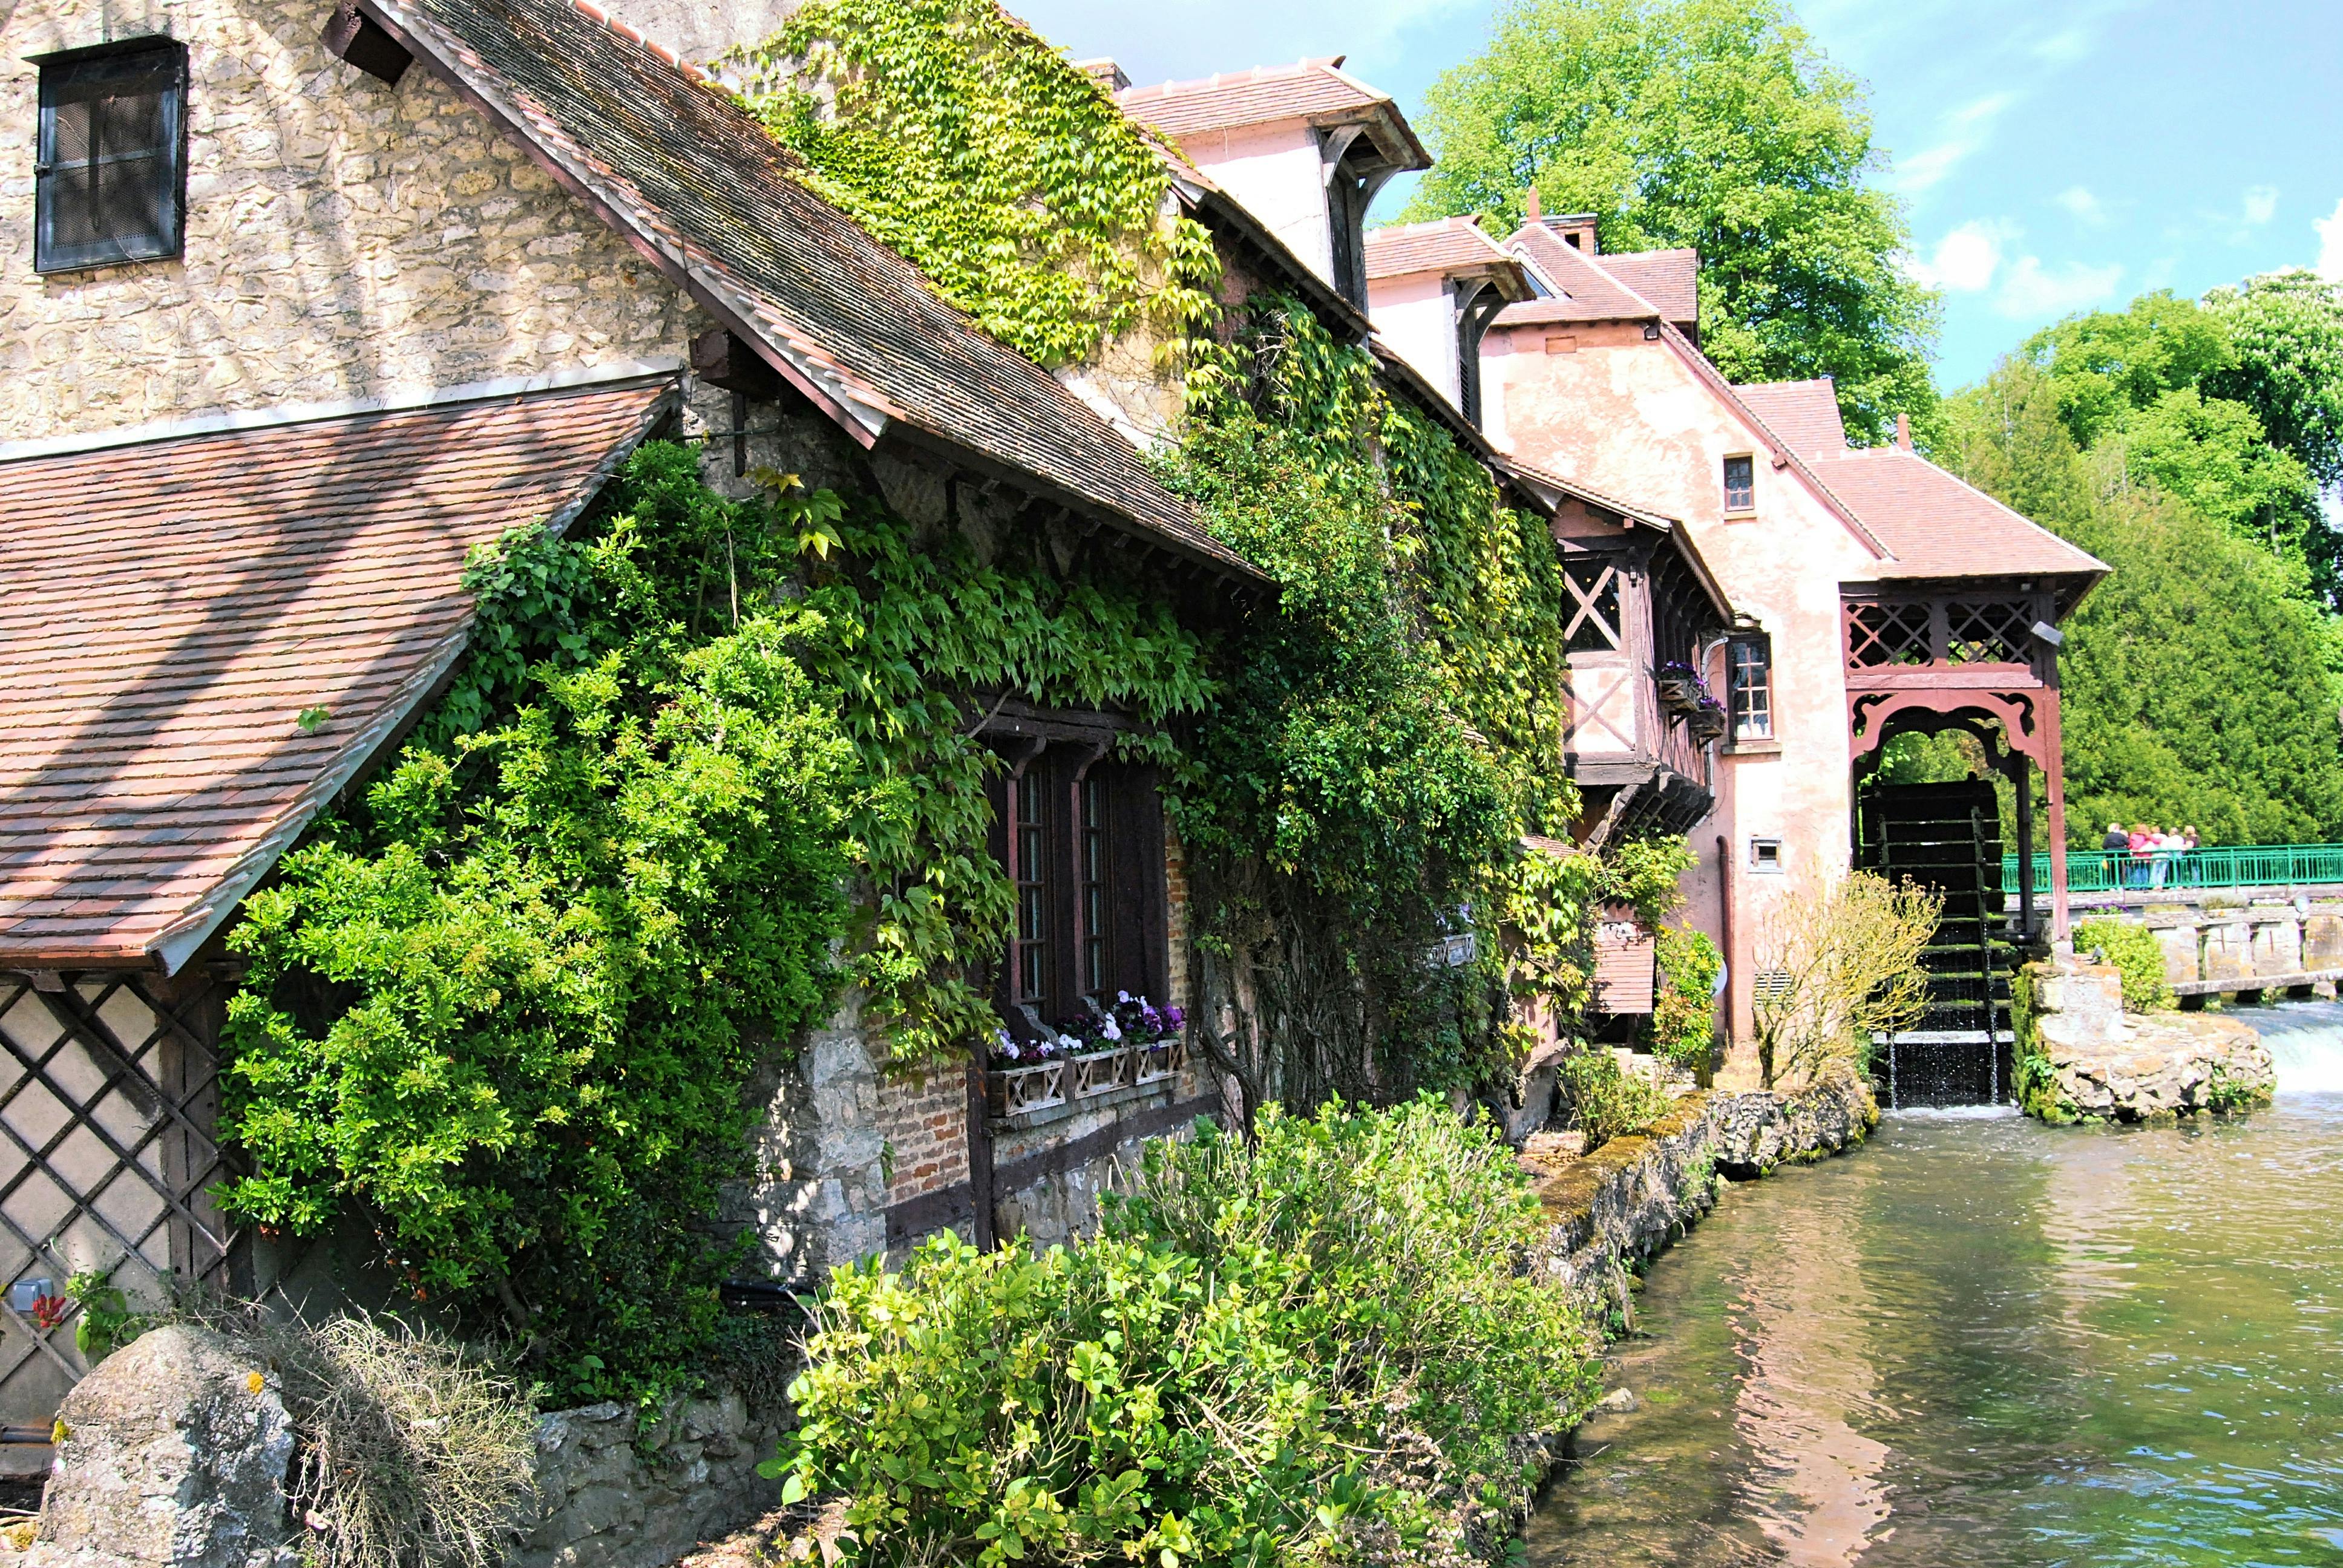 Small-group excursion to Giverny and Versailles from Paris